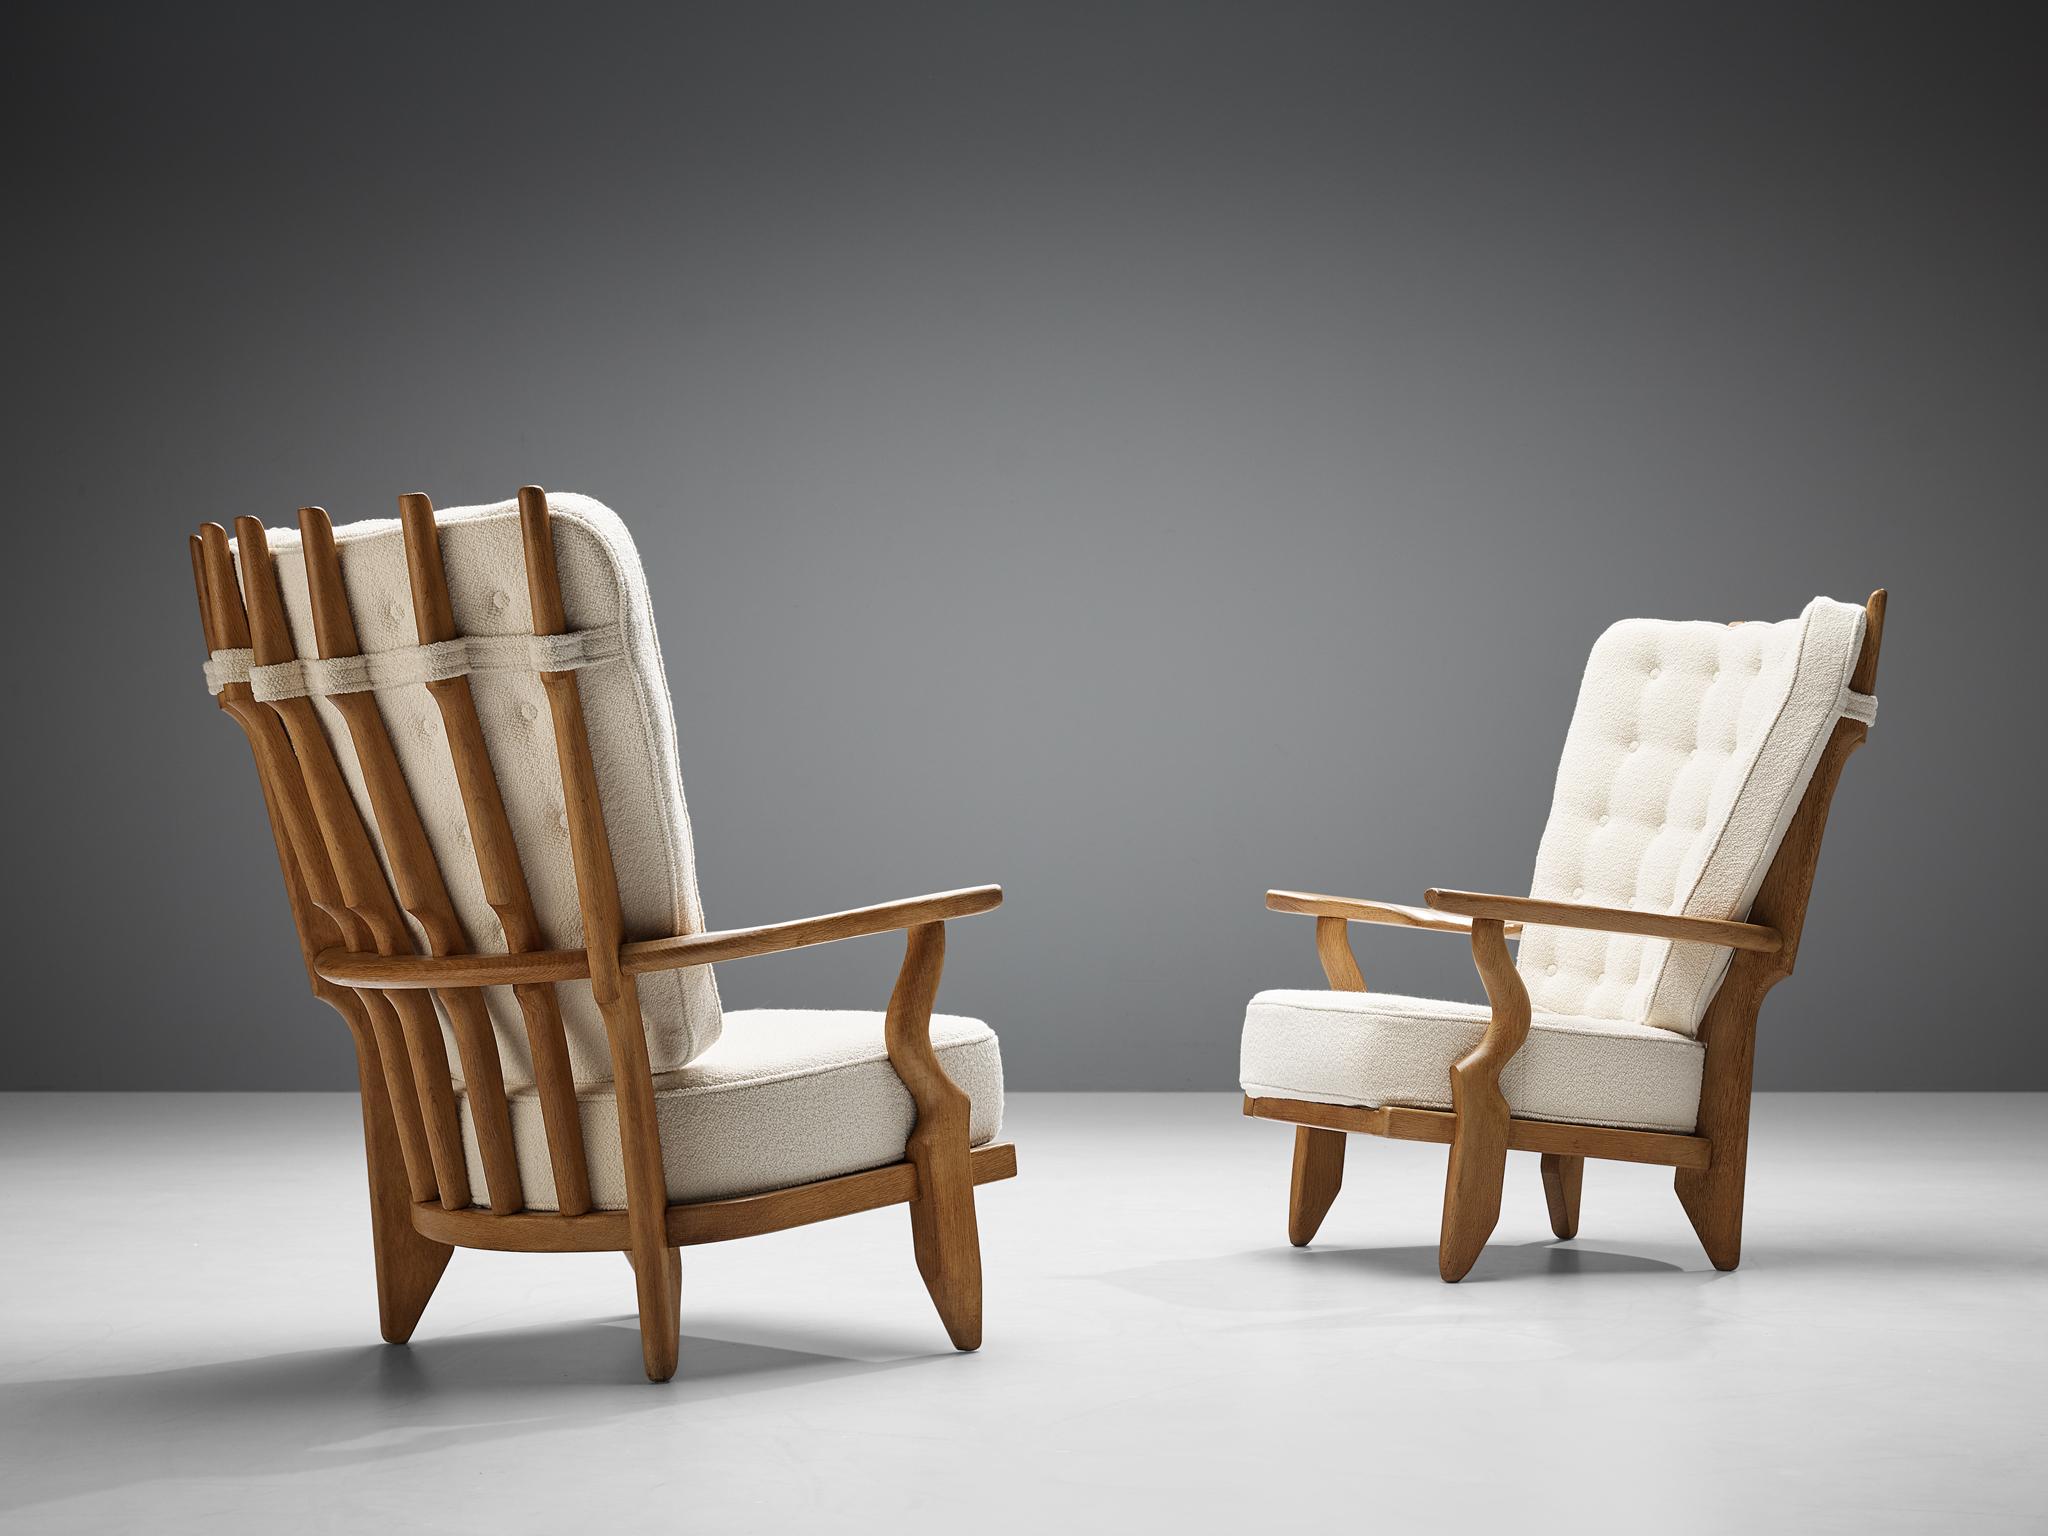 Guillerme et Chambron, Pair of 'Grand Repos' lounge chair oak, white woolen Pierre Frey upholstery, oak, France, 1960s.

Guillerme and Chambron are known for their high quality solid oak furniture, from which this is another great example. These